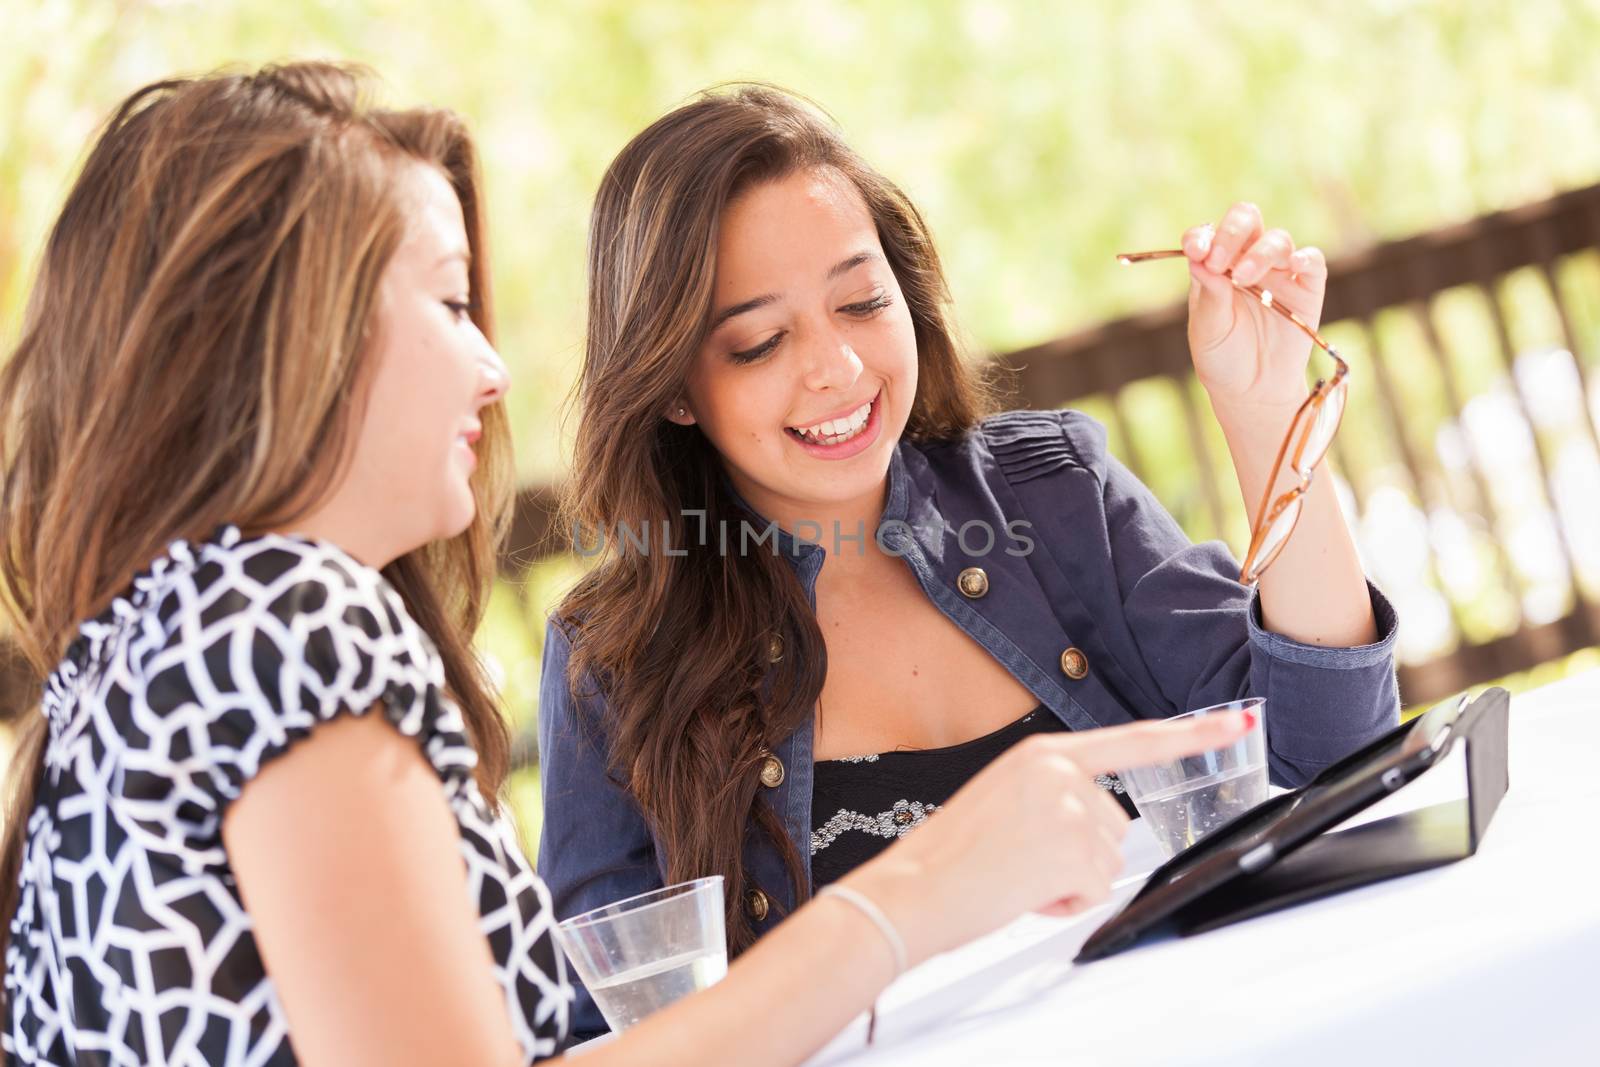 Expressive Young Adult Girlfriends Using Their Computer Electronics Outdoors